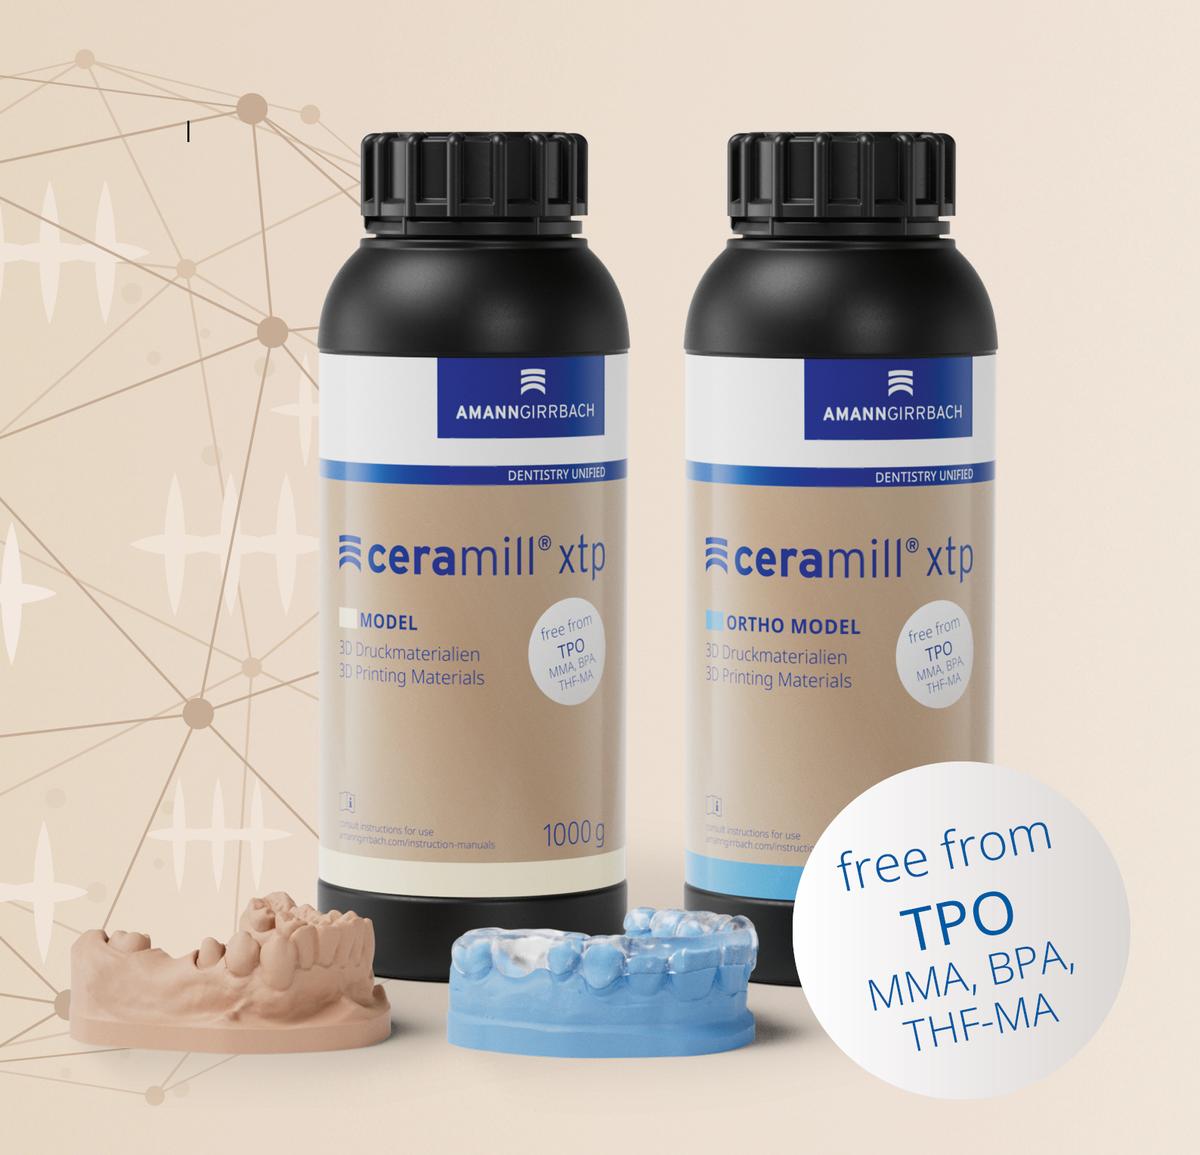 Ceramill XTP - New structure. Next chapter.